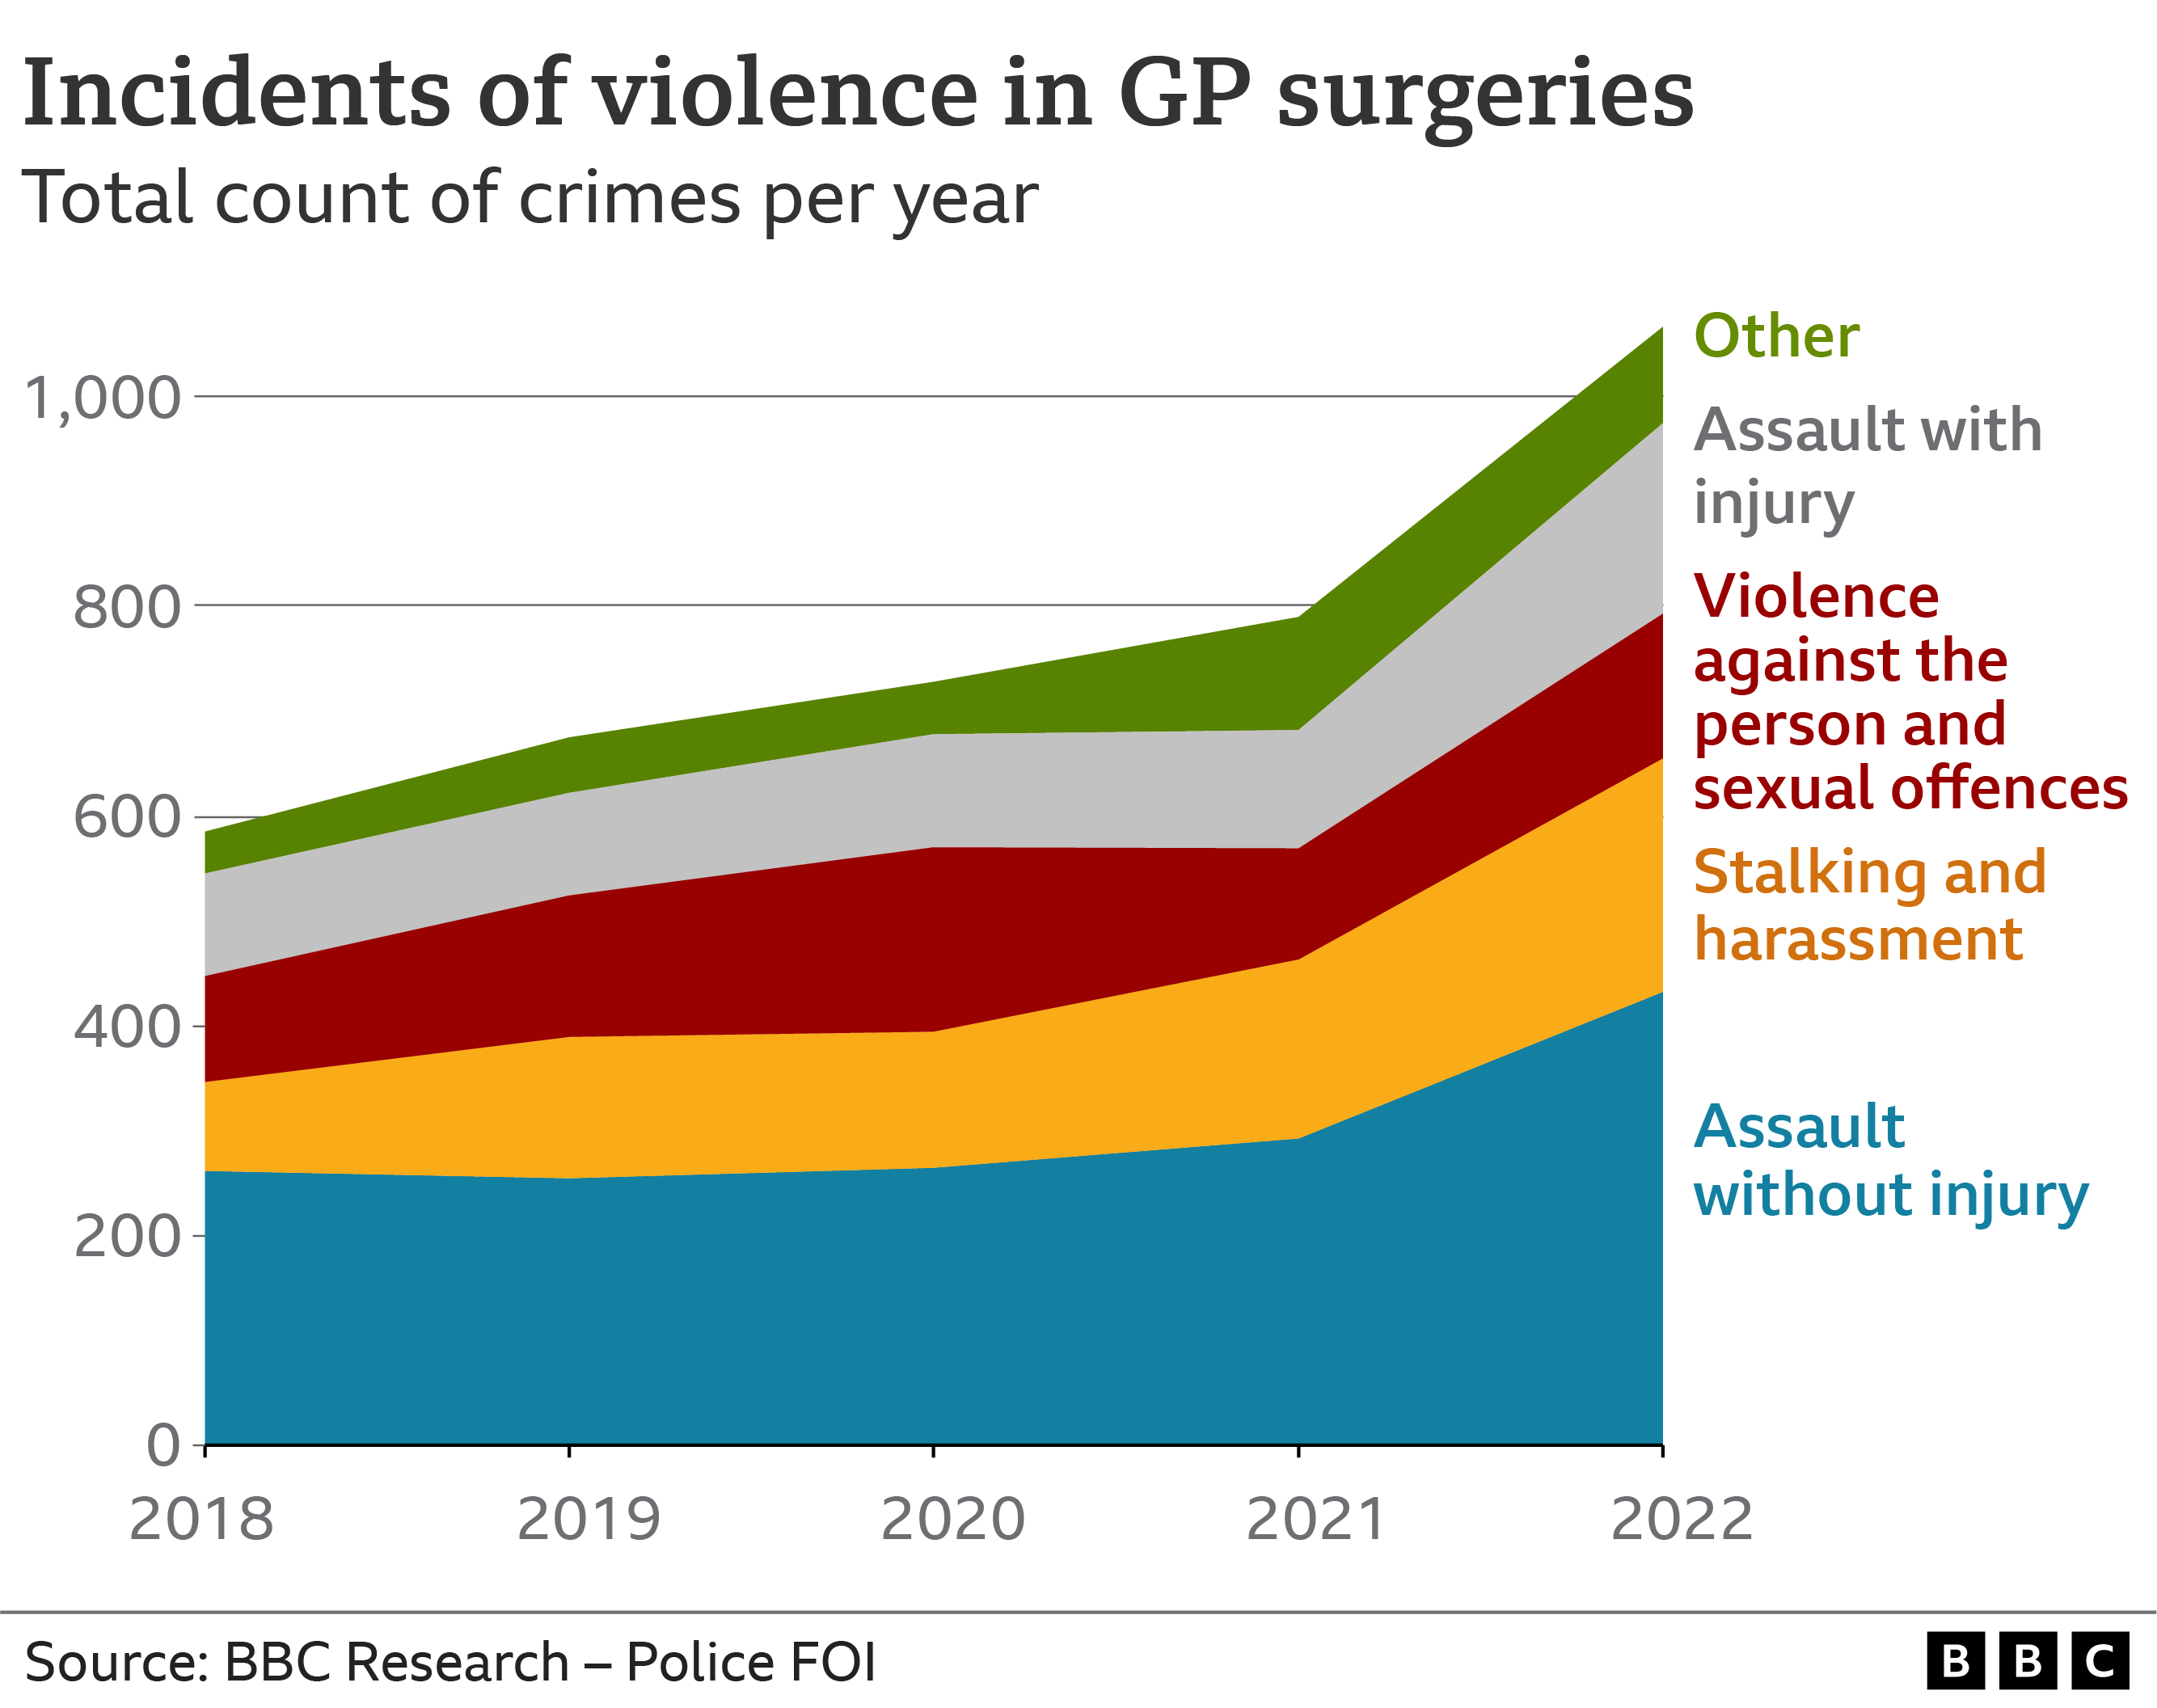 Graphic showing details of types of assaults in surgeries